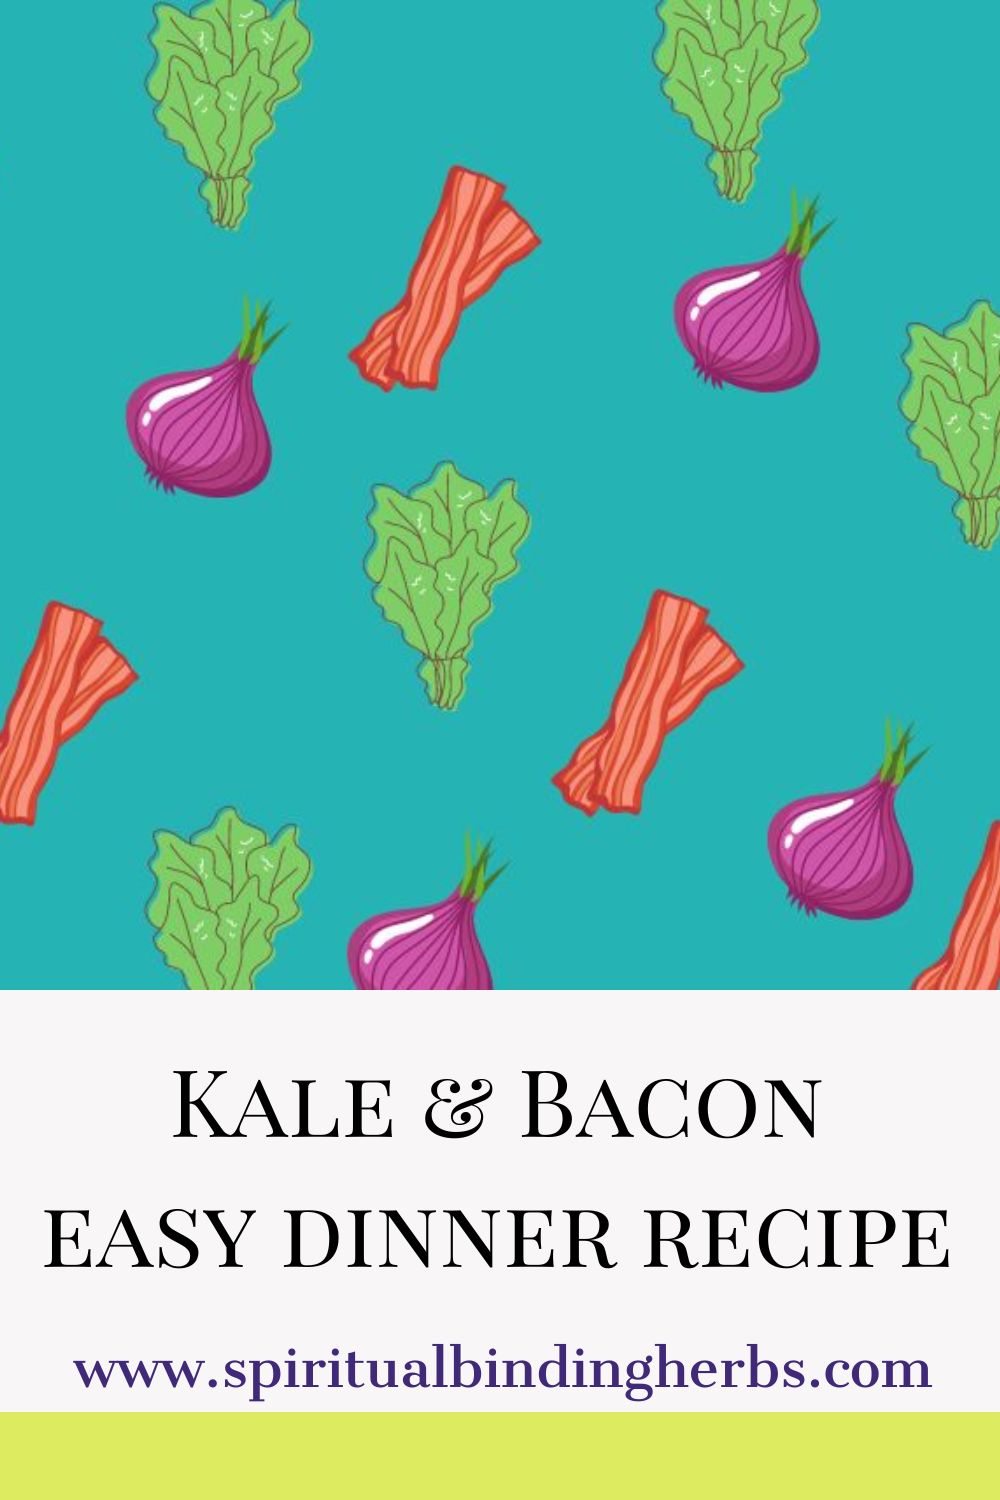 Try This Quick and Easy Five Ingredient Kale & Bacon Recipe